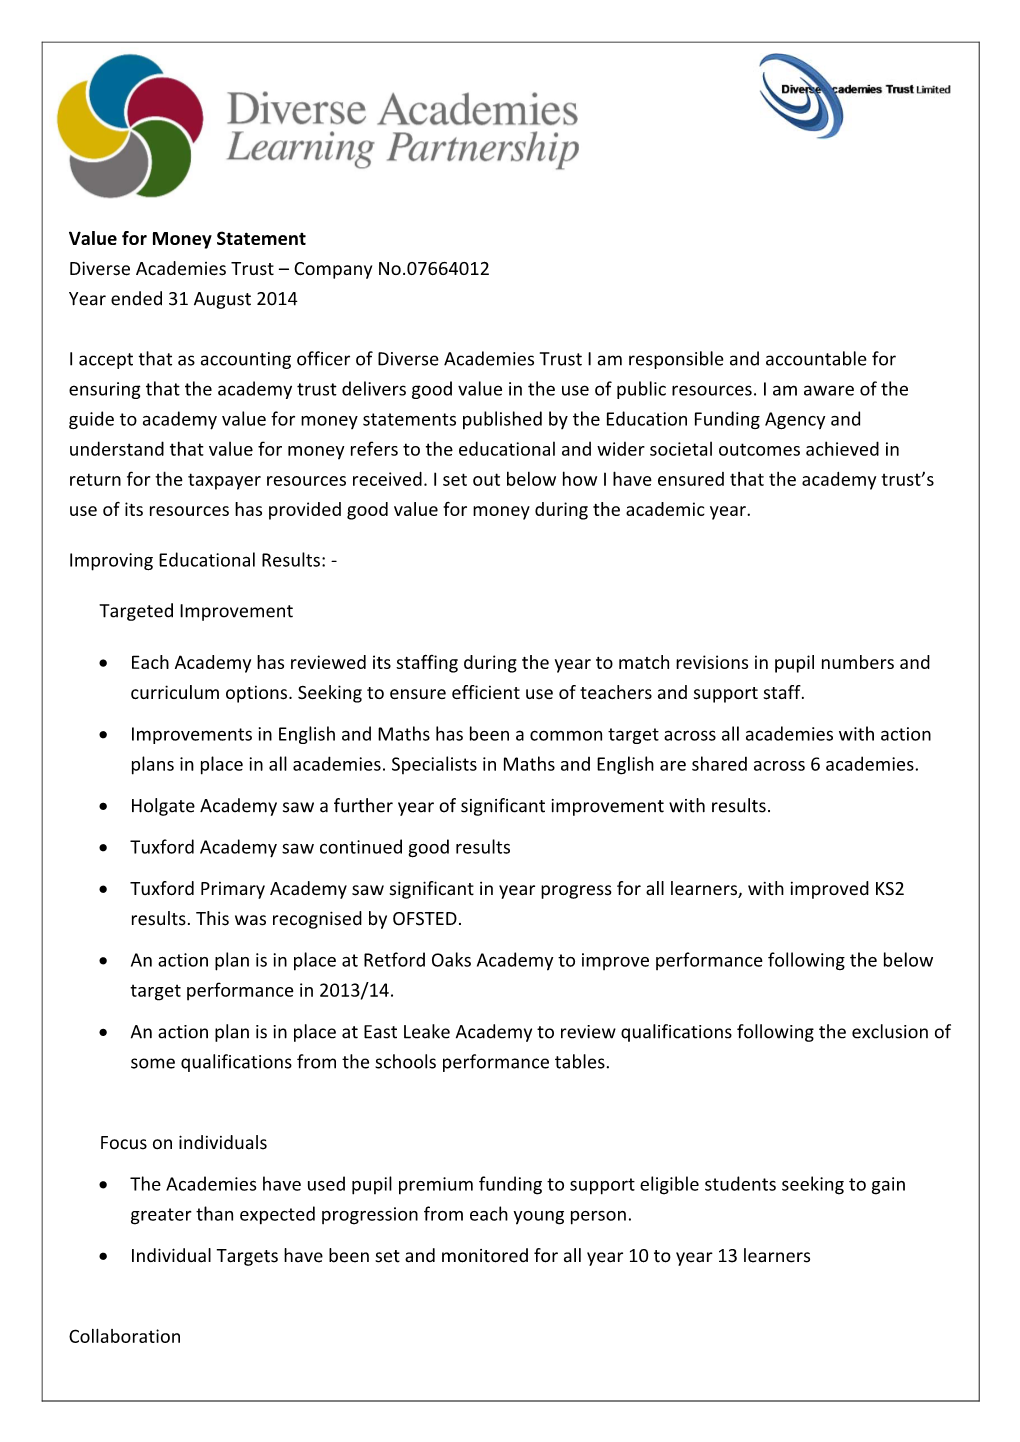 Value for Money Statement Diverse Academies Trust – Company No.07664012 Year Ended 31 August 2014